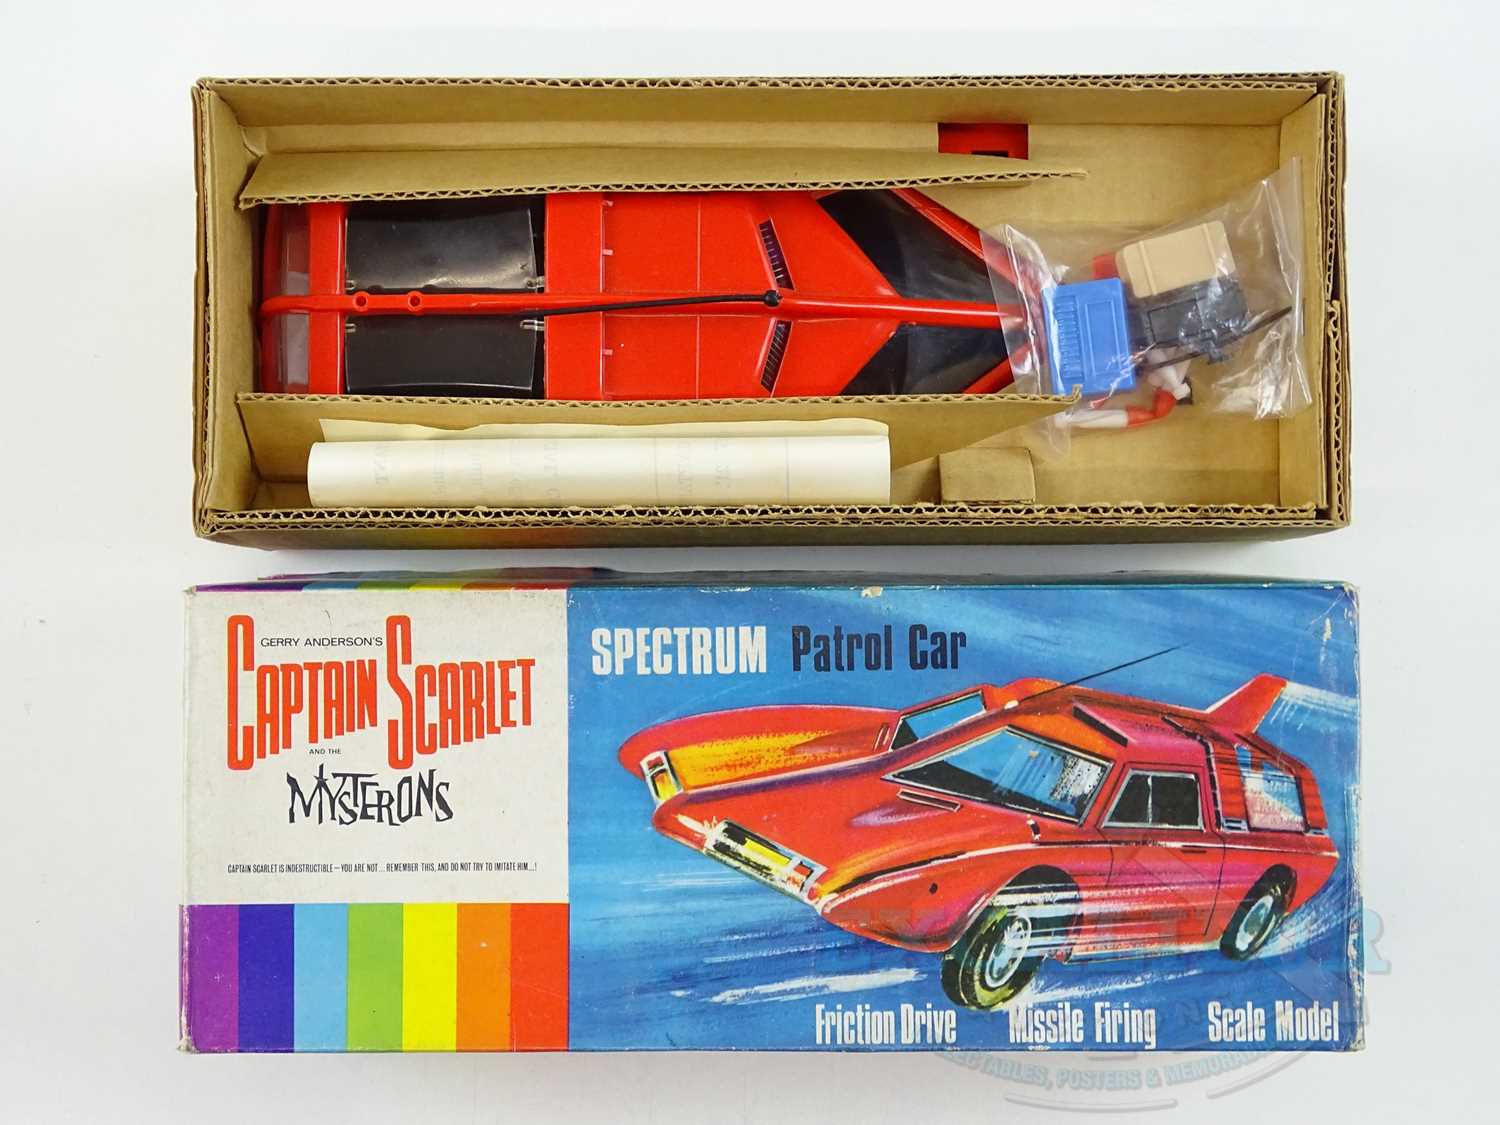 A CENTURY 21 TOYS Gerry Anderson 'Captain Scarlet' friction driven Spectrum Patrol Car in original - Image 3 of 18